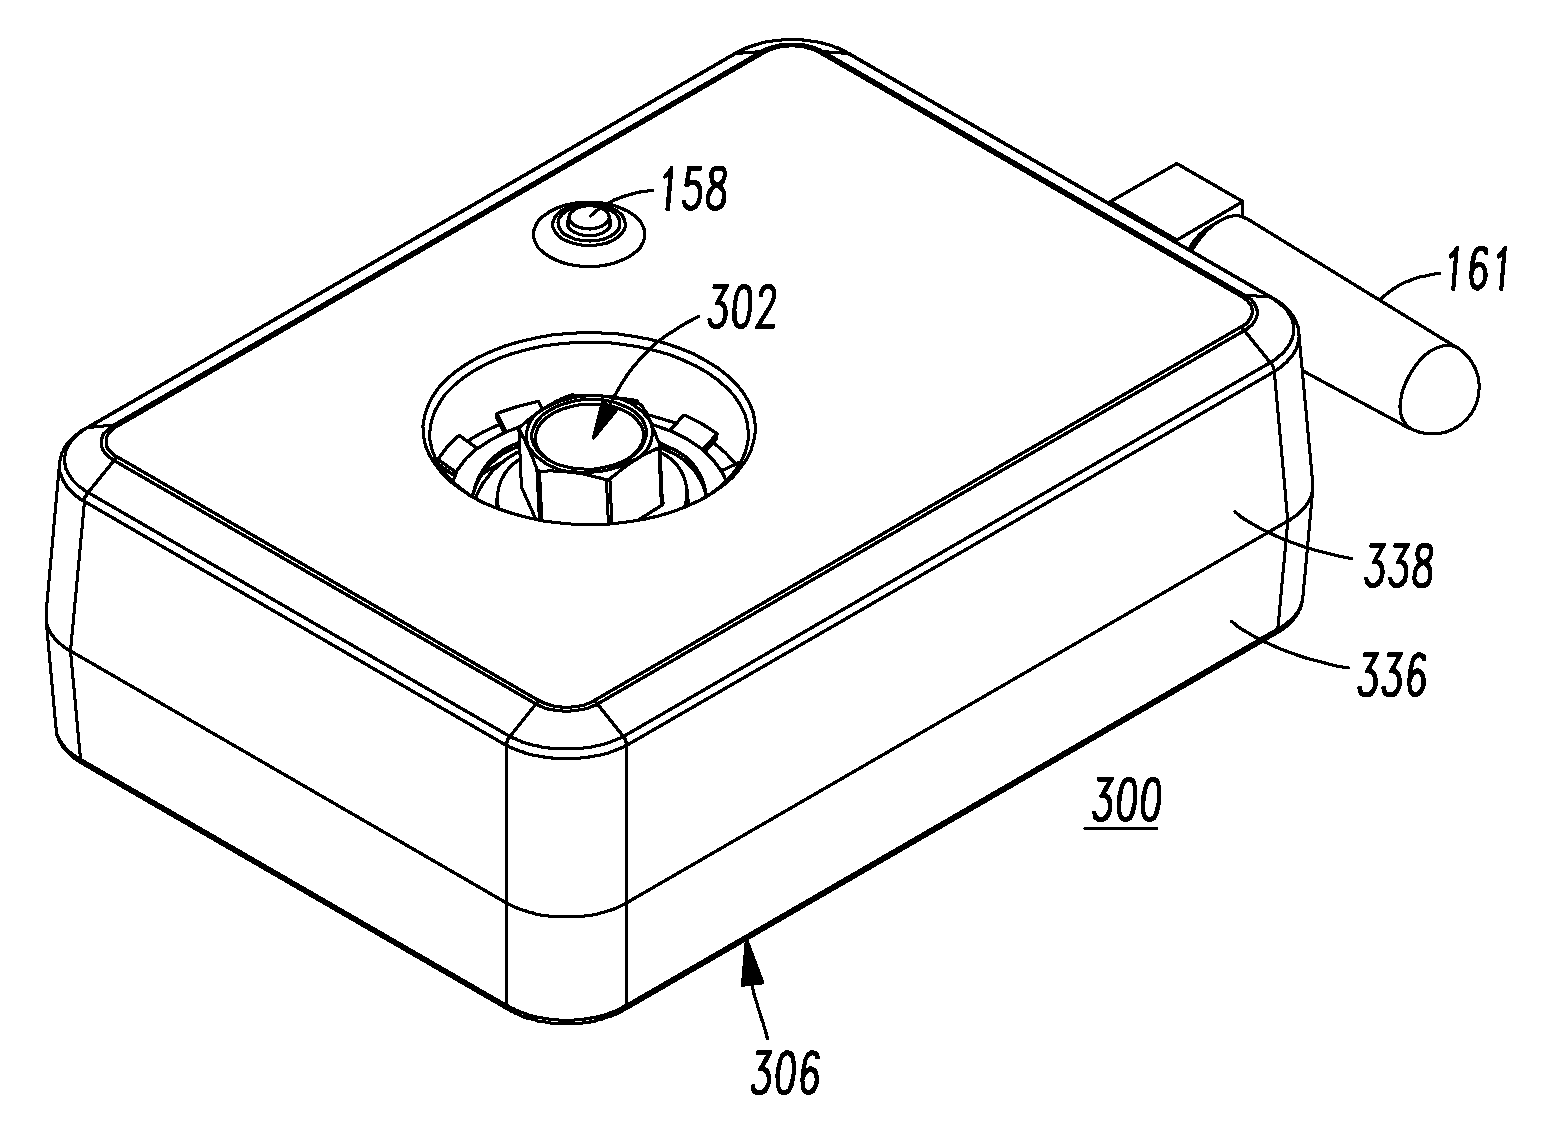 Acoustic apparatus and acoustic sensor apparatus including a fastener